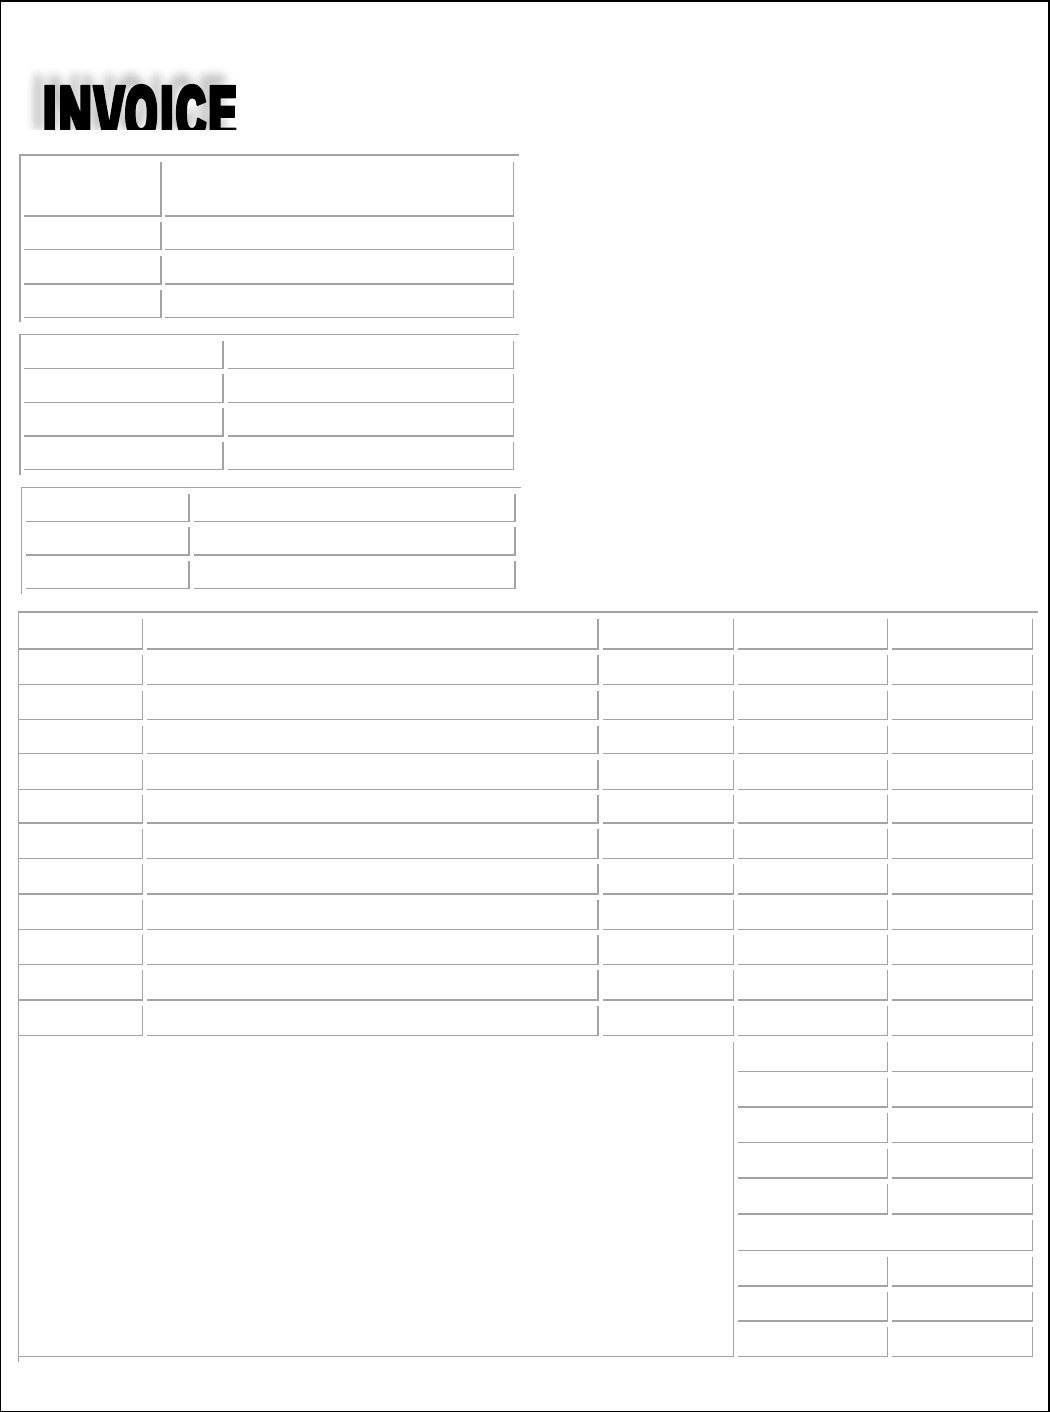 Blank Invoice Template 4